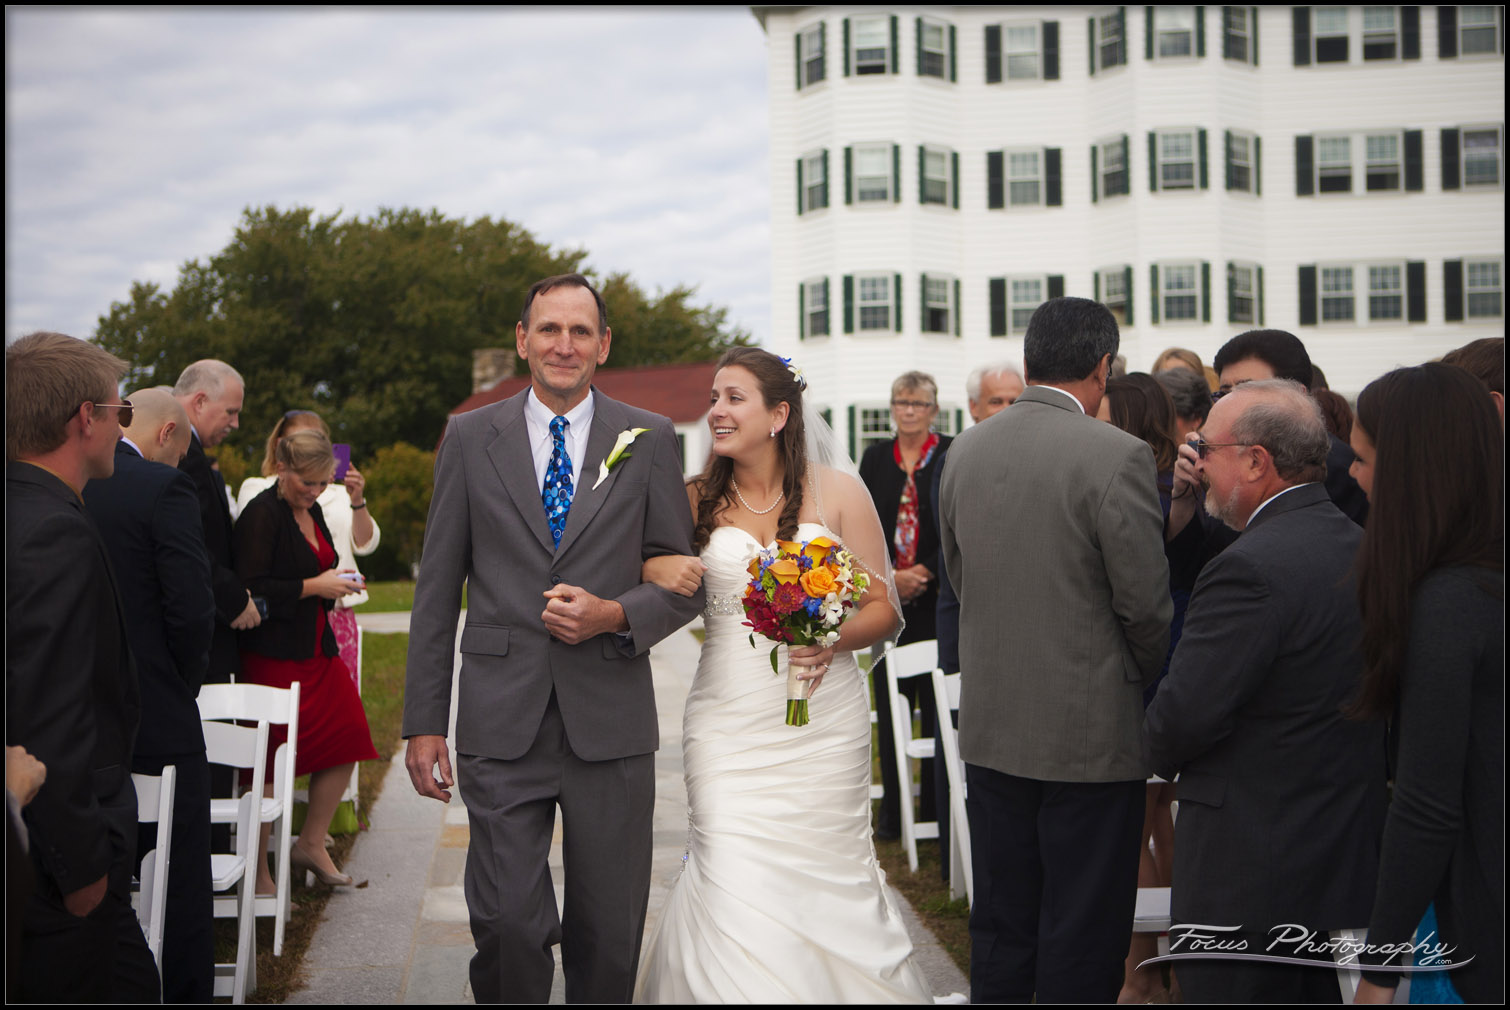 Wedding ceremony pictures from the Colony Hotel in Kennebunkport, Maine